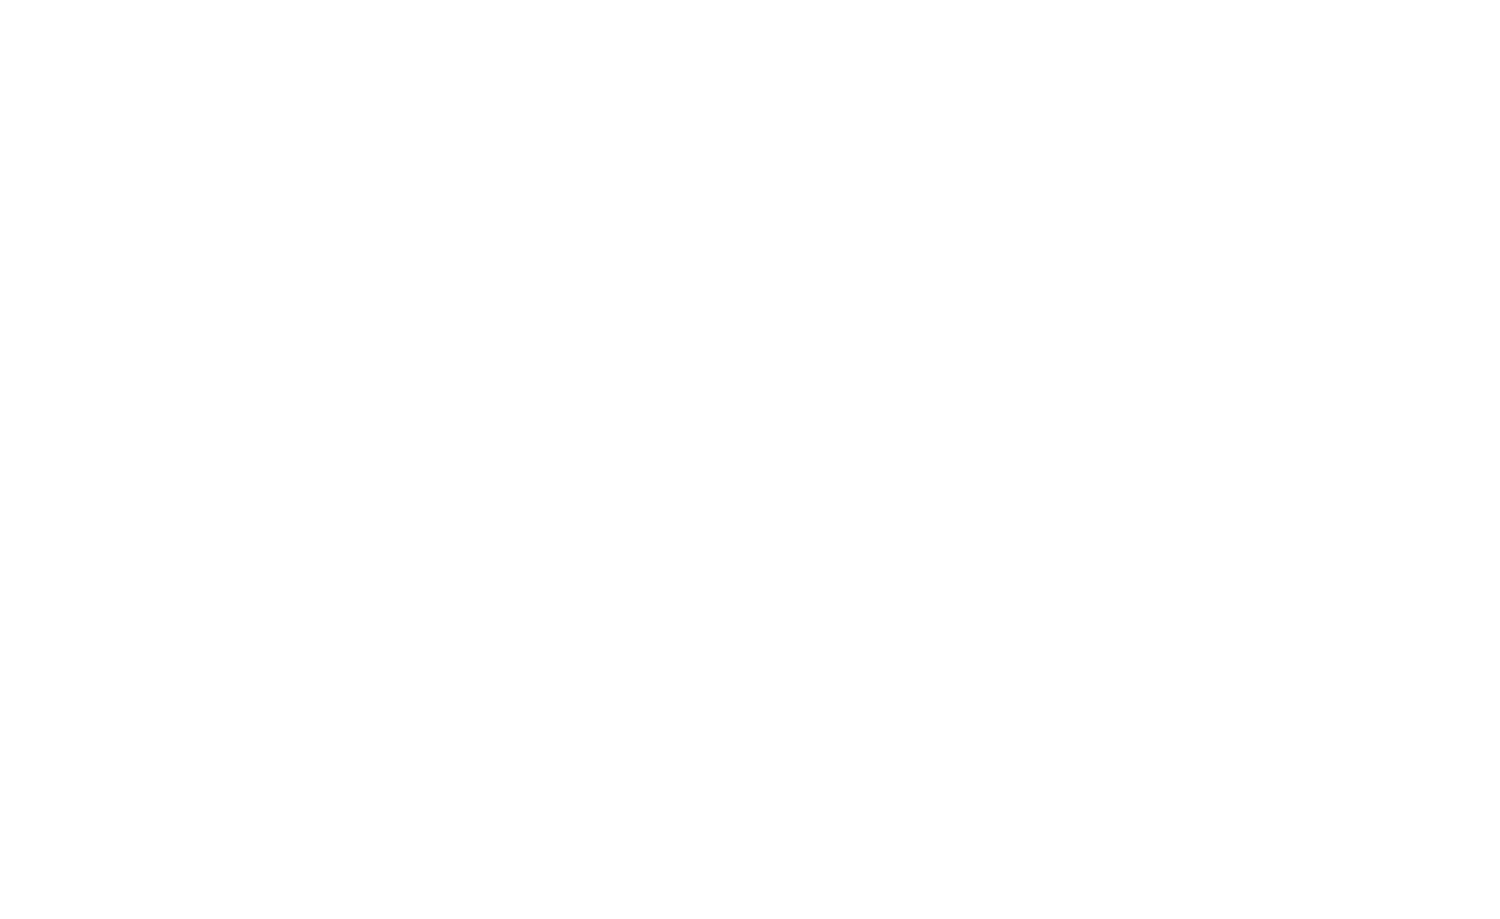 Brows Inc